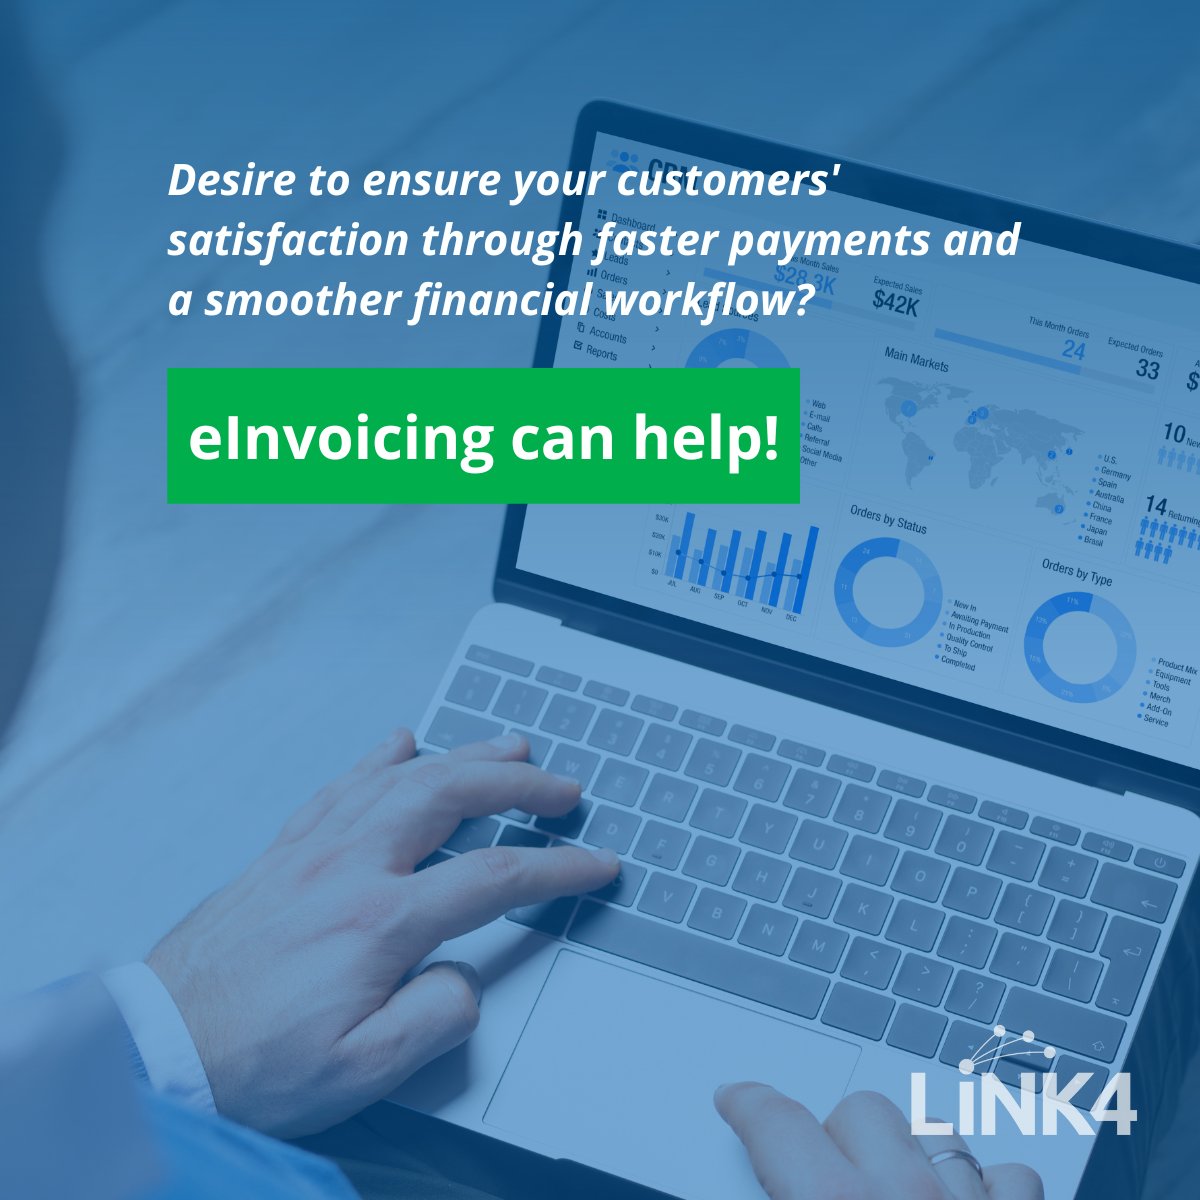 Accelerate cash flow with #eInvoicing! Timely, accurate invoices to credit-worthy clients boost efficiency and cut delays. Discover more at zurl.co/yaBj. 

#Link4 #FasterPayments #ImprovedCashflow #B2B